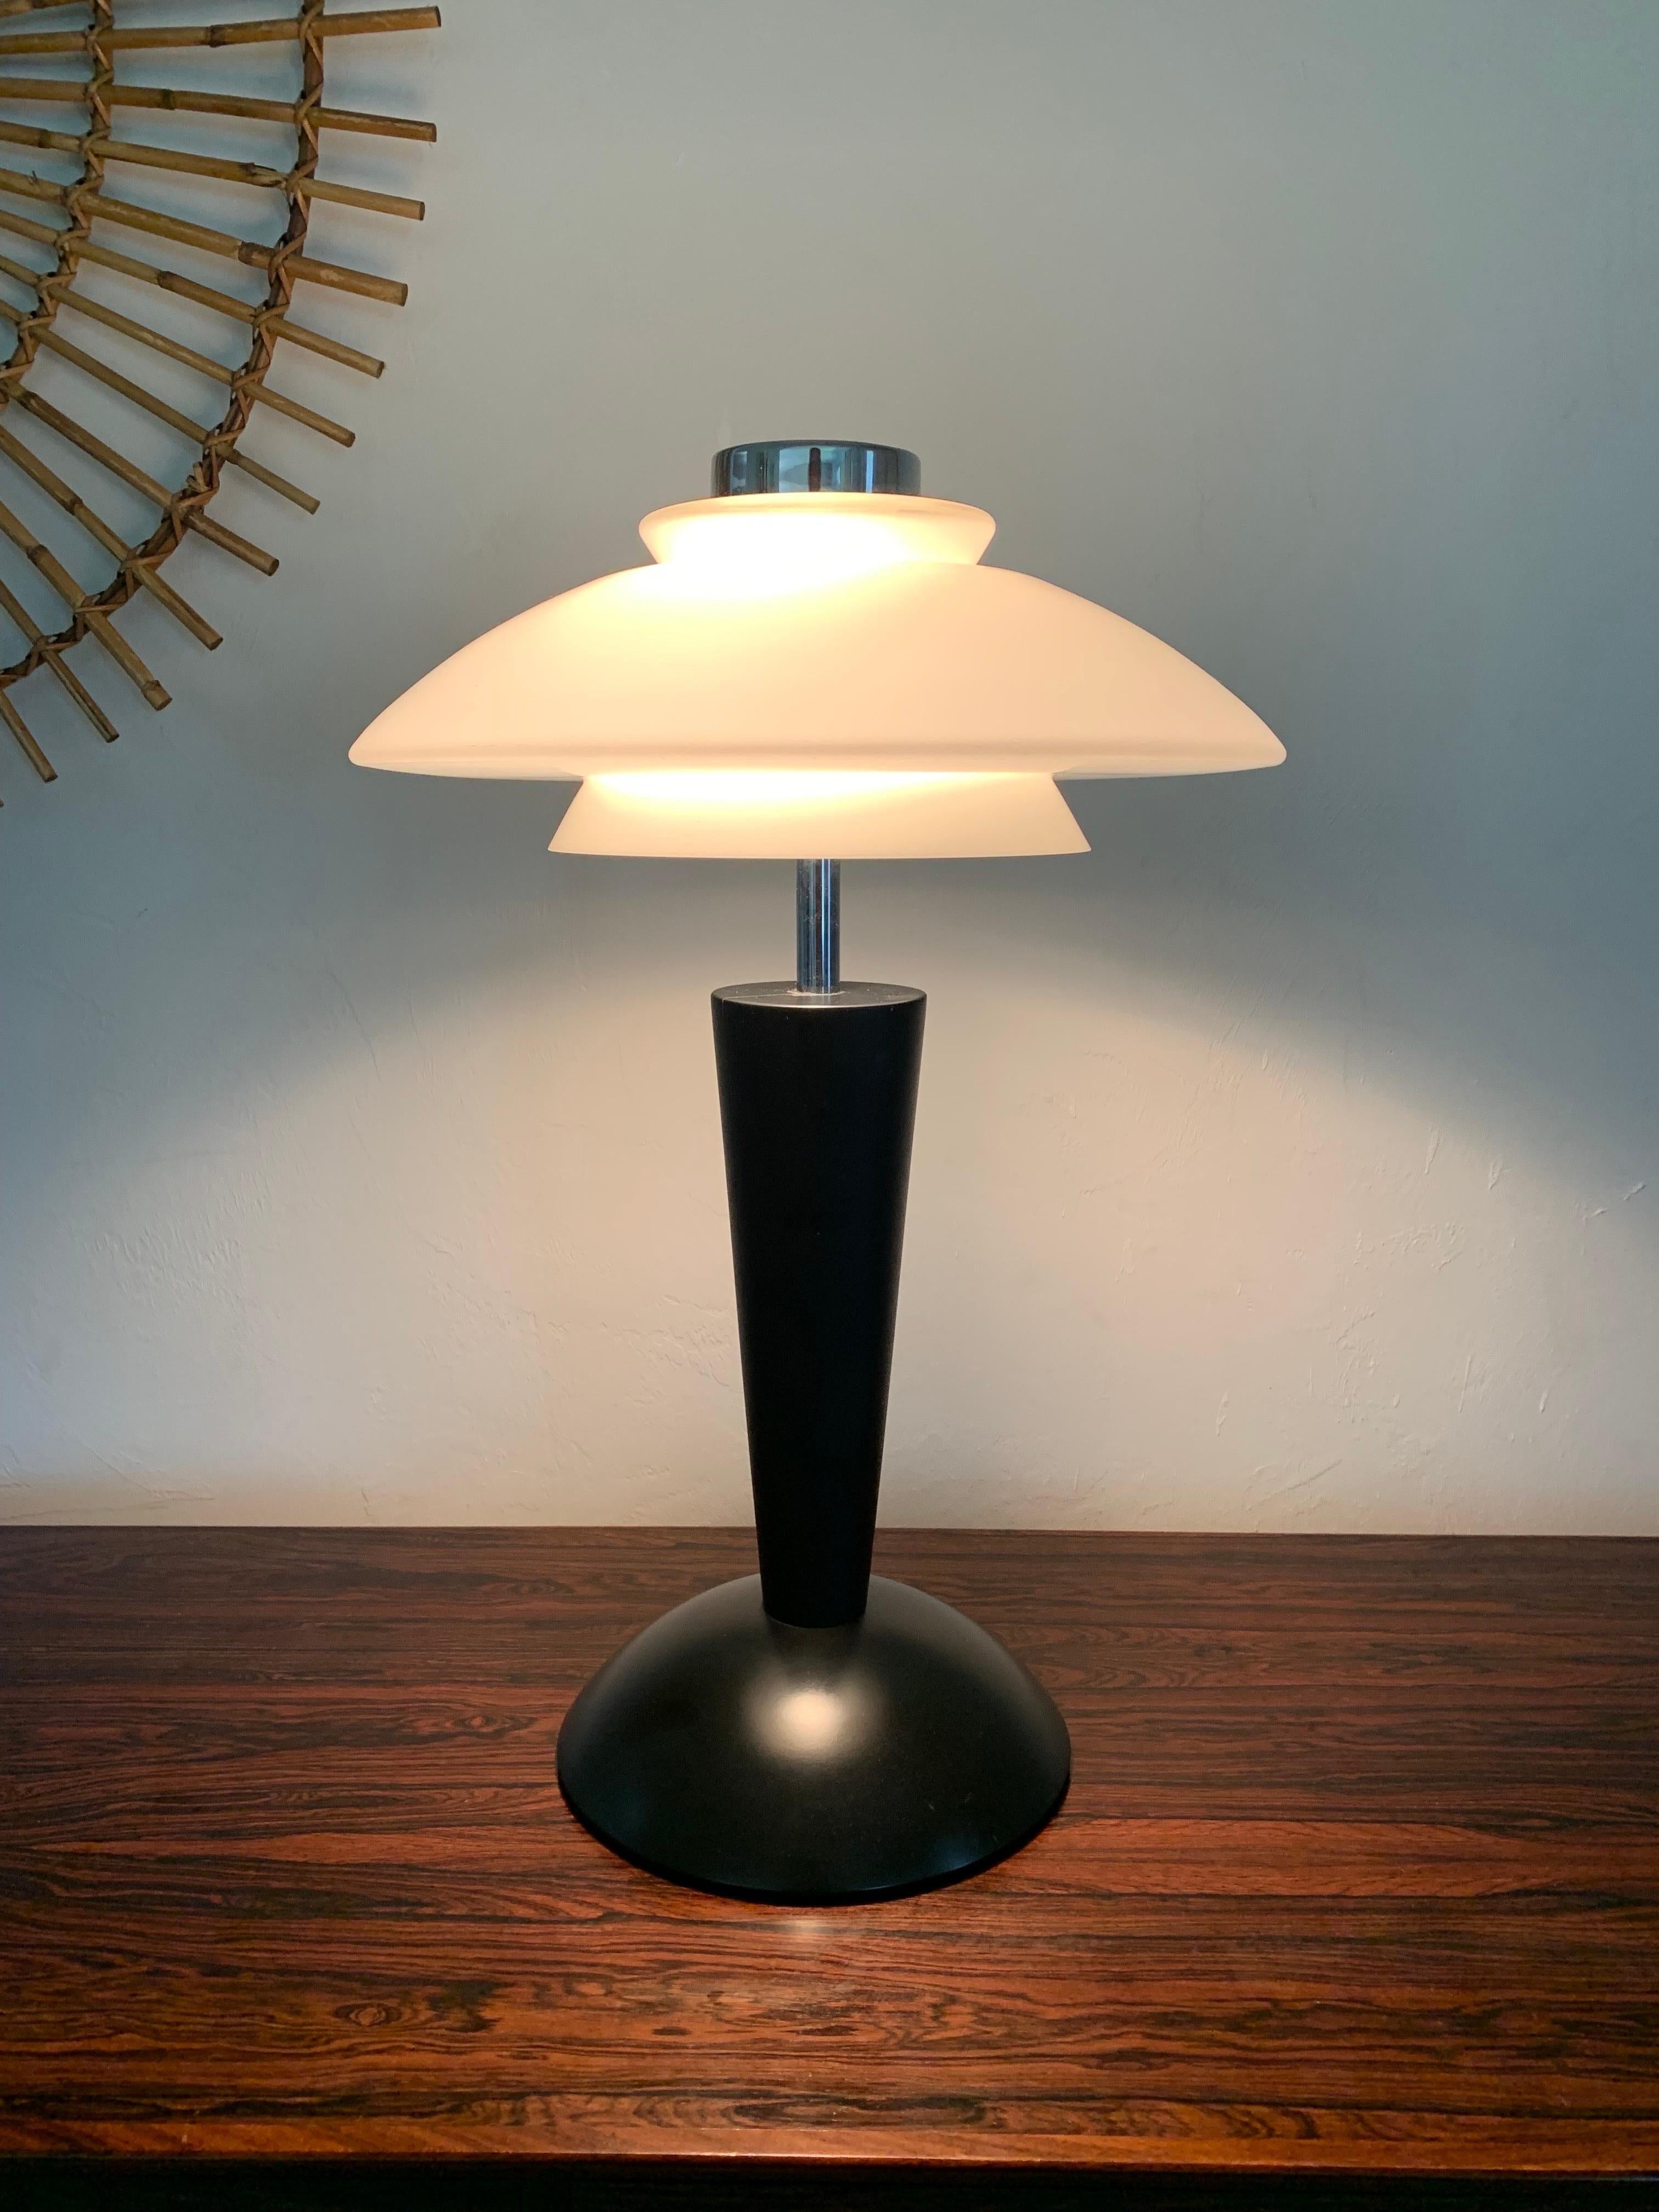 Black, Chrome, and Glass Table Lamp by Putzler, 1970s, Made in Germany In Good Condition For Sale In Boynton Beach, FL